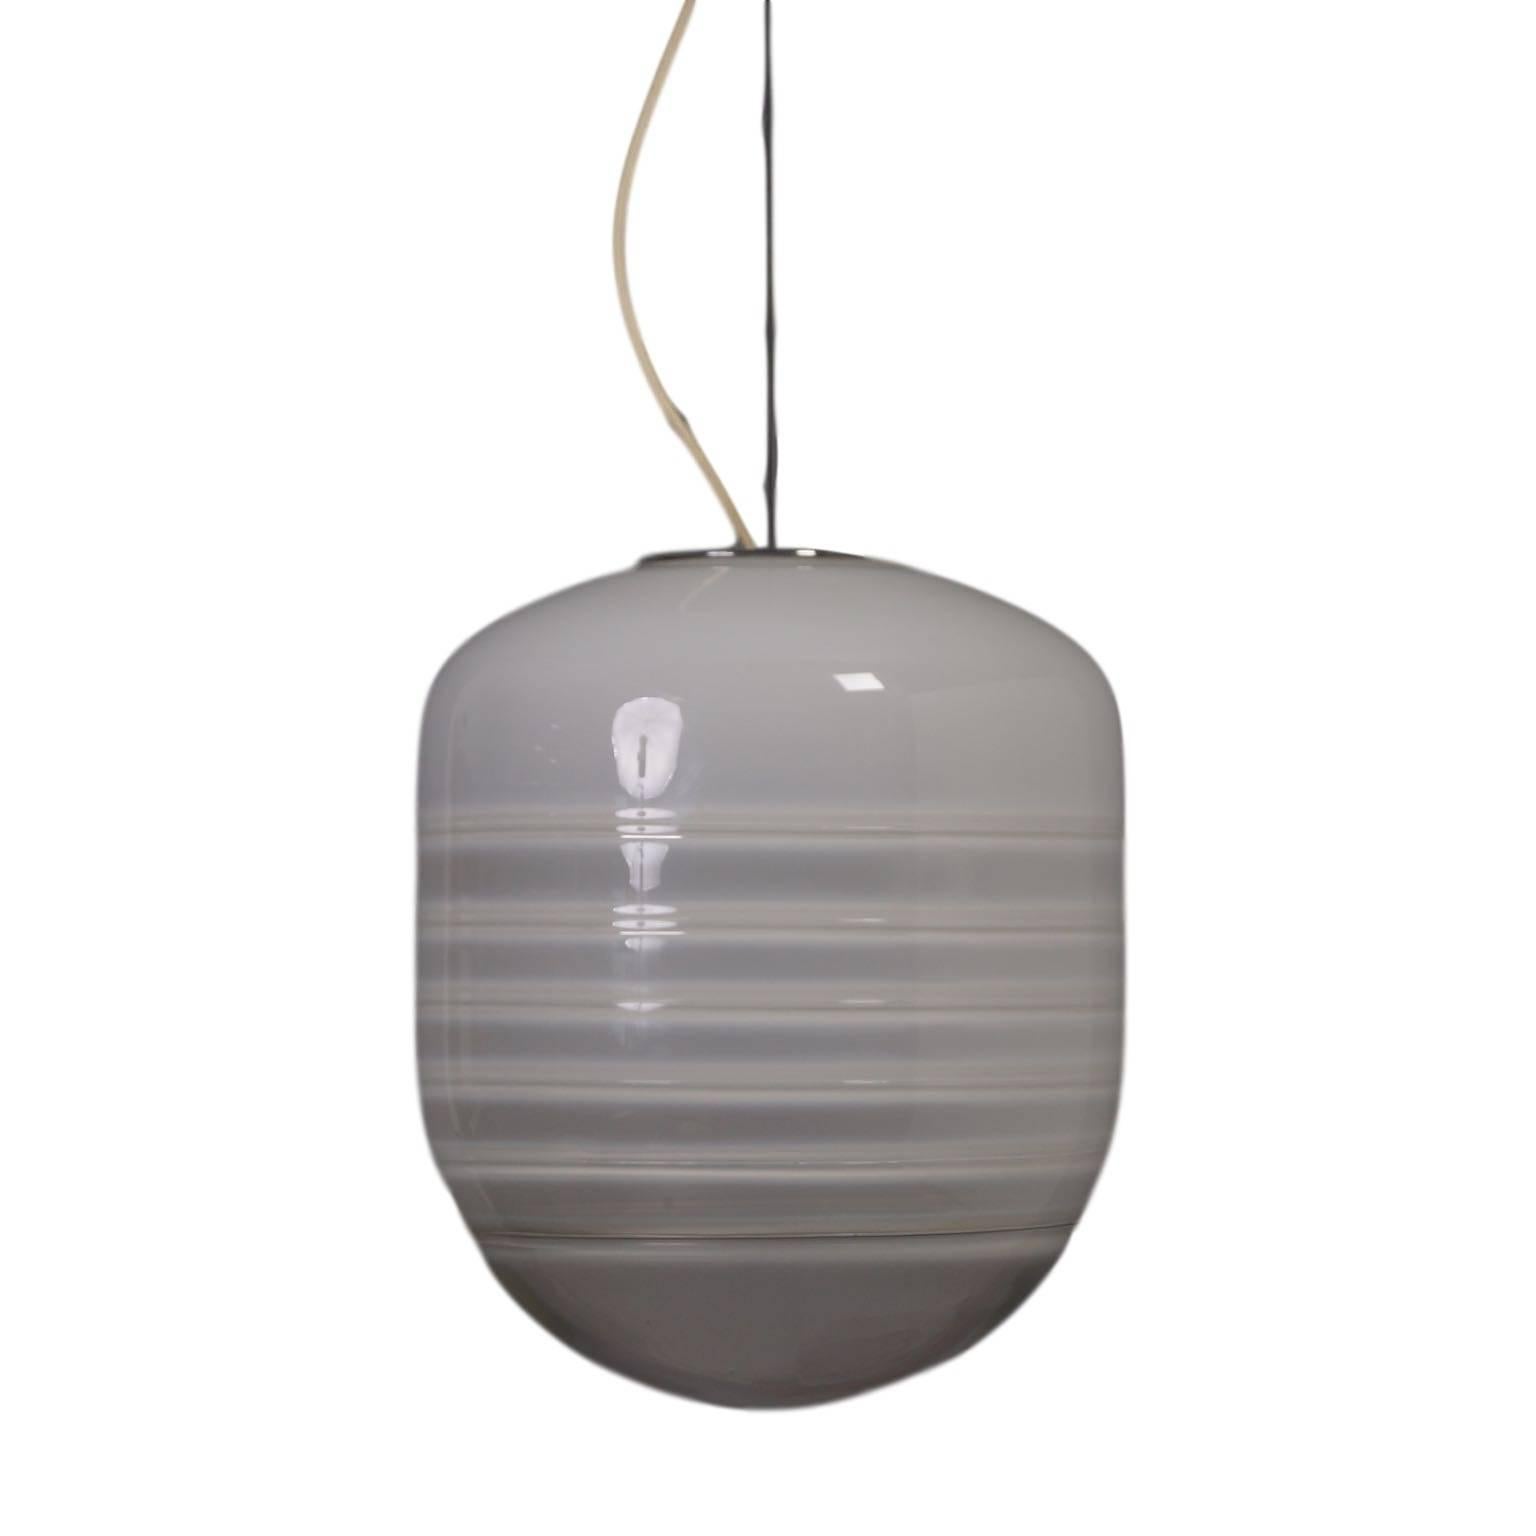 Large Italian Murano pendant by Alfredo Barbini, 1960s; designed by Alfredo Barbini and made in Italy at Vetreria Alfredo Barbini. This lamp is made of mouth blown Murano glass and hangs on a frame of chromed metal. The handblown Murano glass is